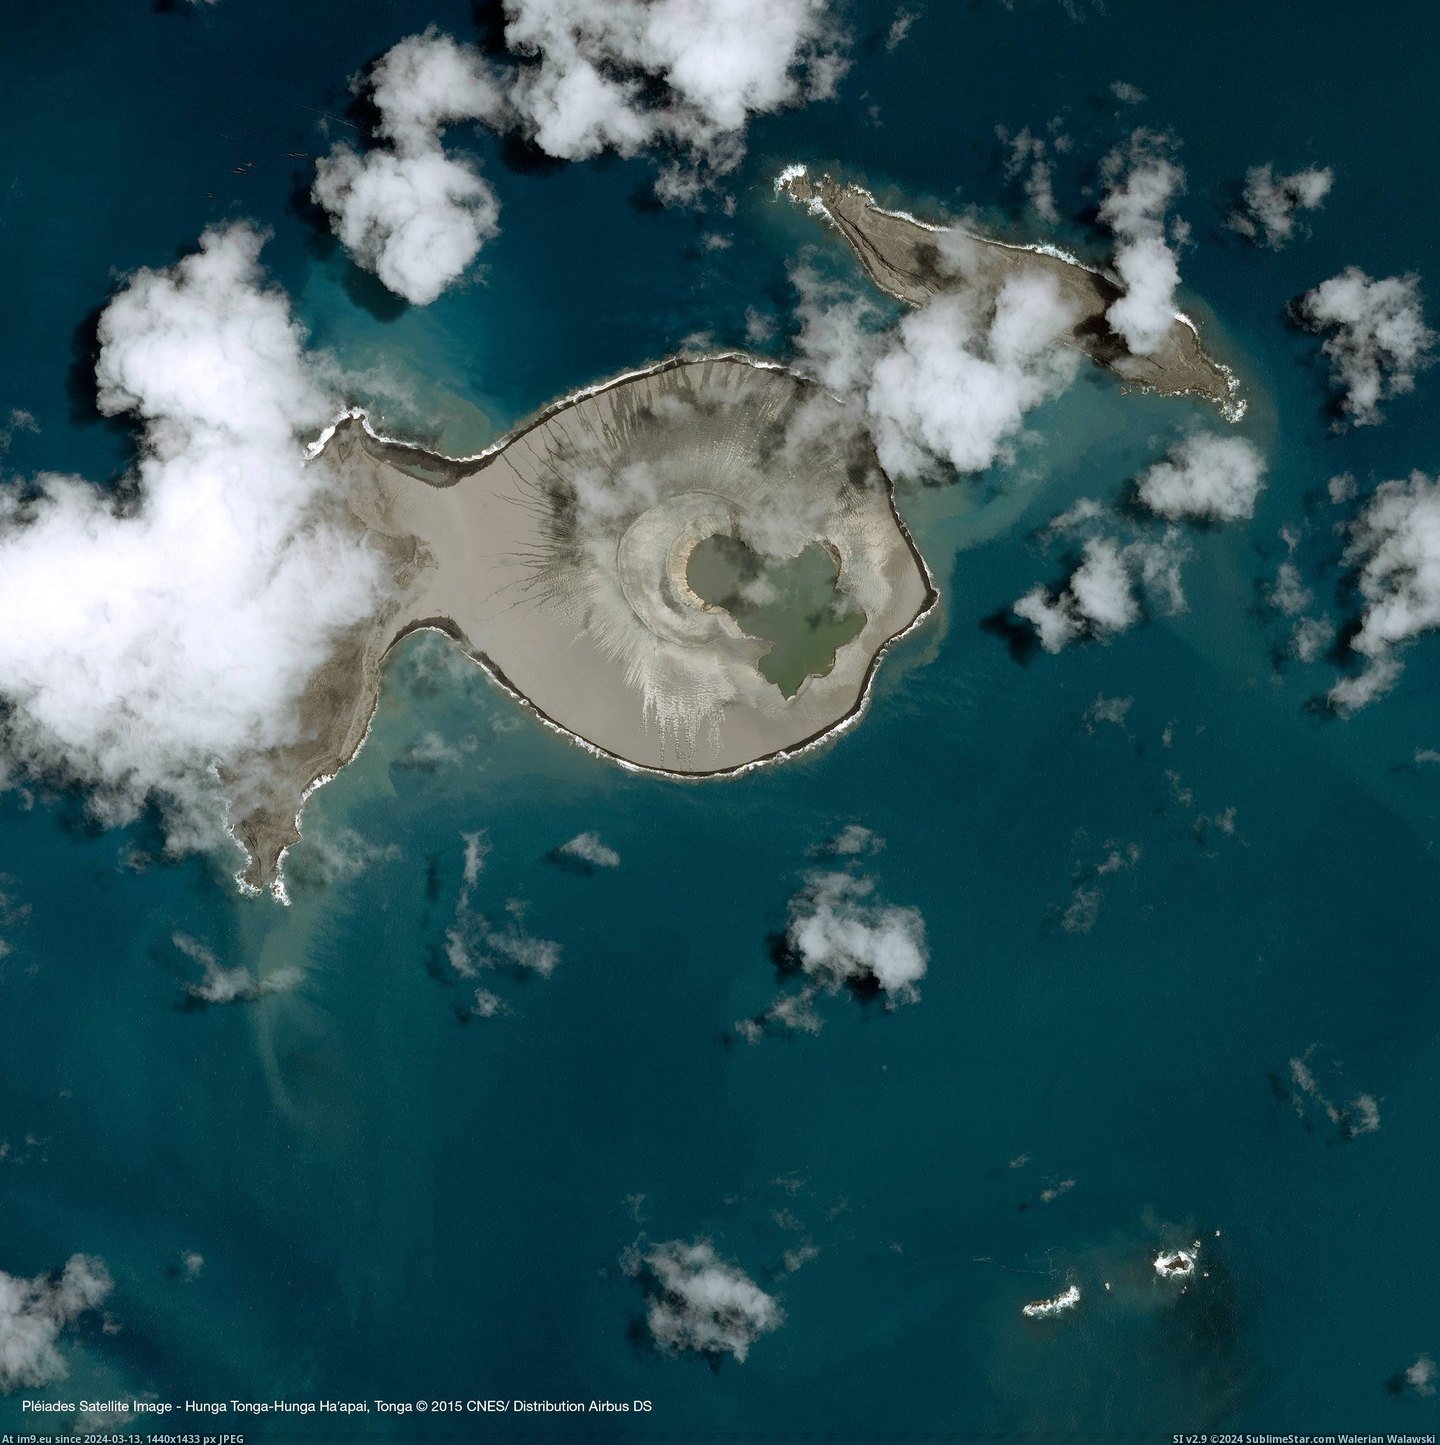 #World #Island #Formed #Newest #Volcano #Underwater [Earthporn] Newest island in the world: formed by underwater volcano Hunga Tonga [2500x2500] Pic. (Image of album My r/EARTHPORN favs))